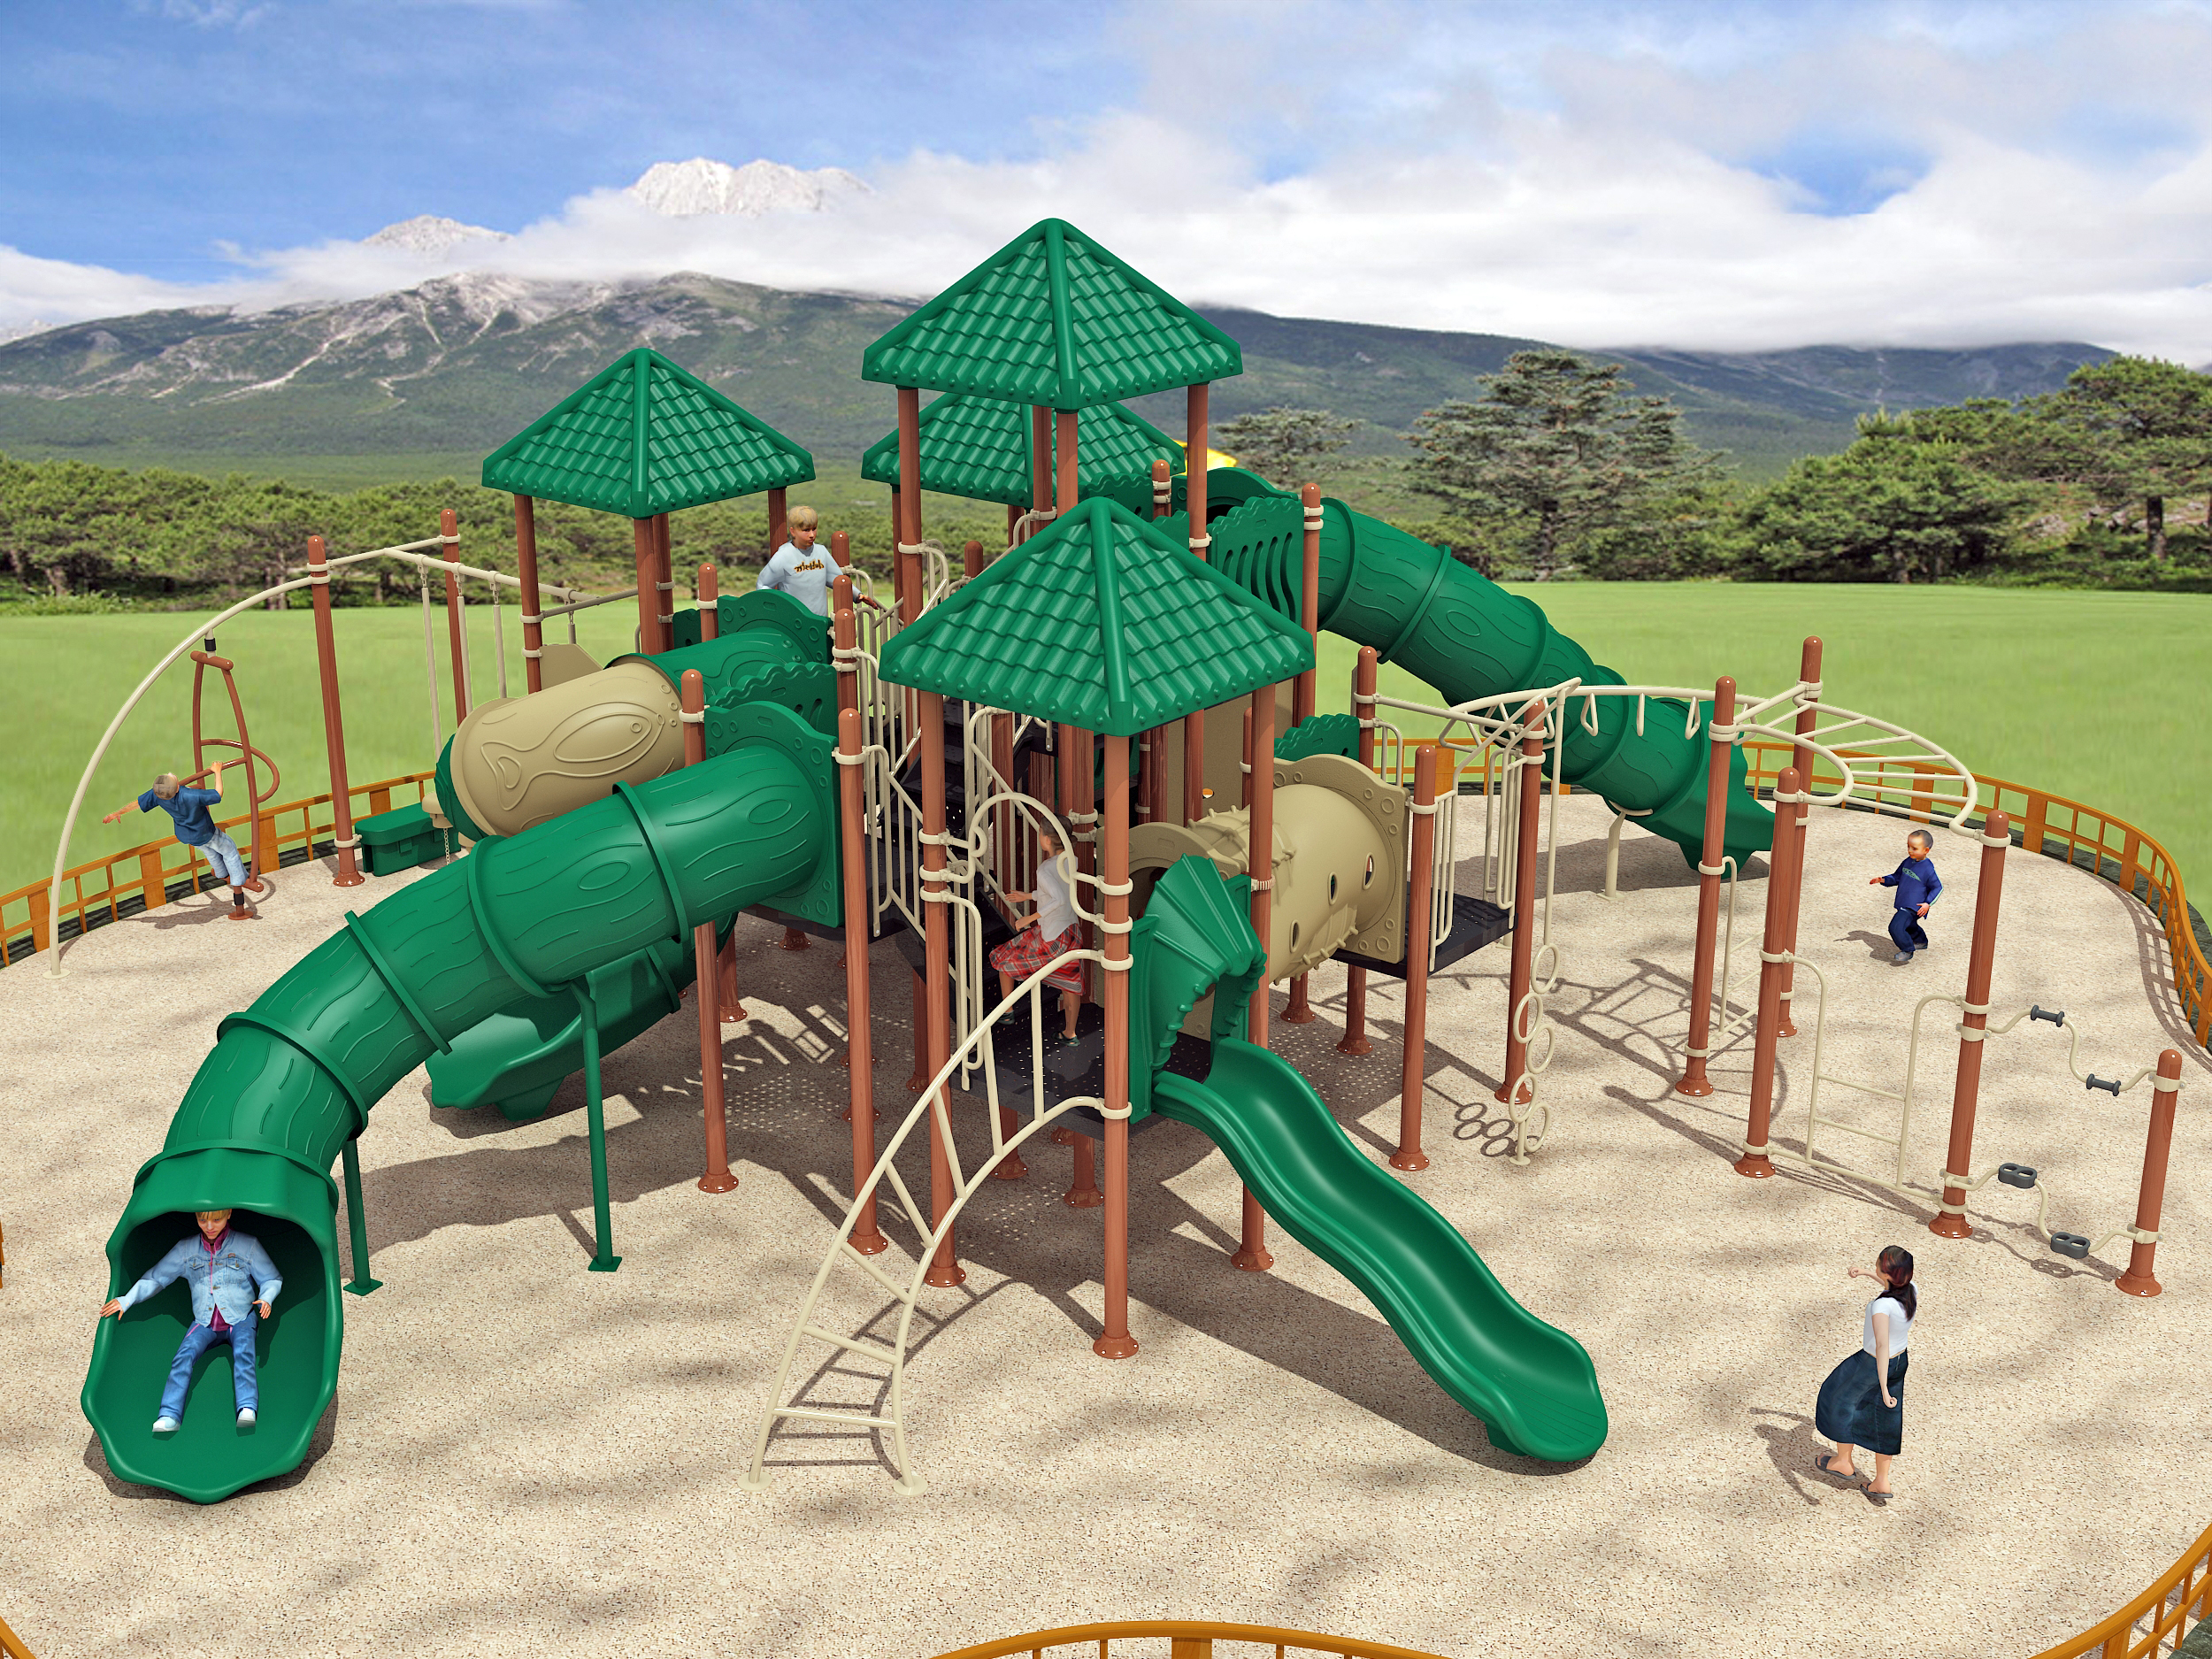 Why are non-standard custom playgrounds popular?